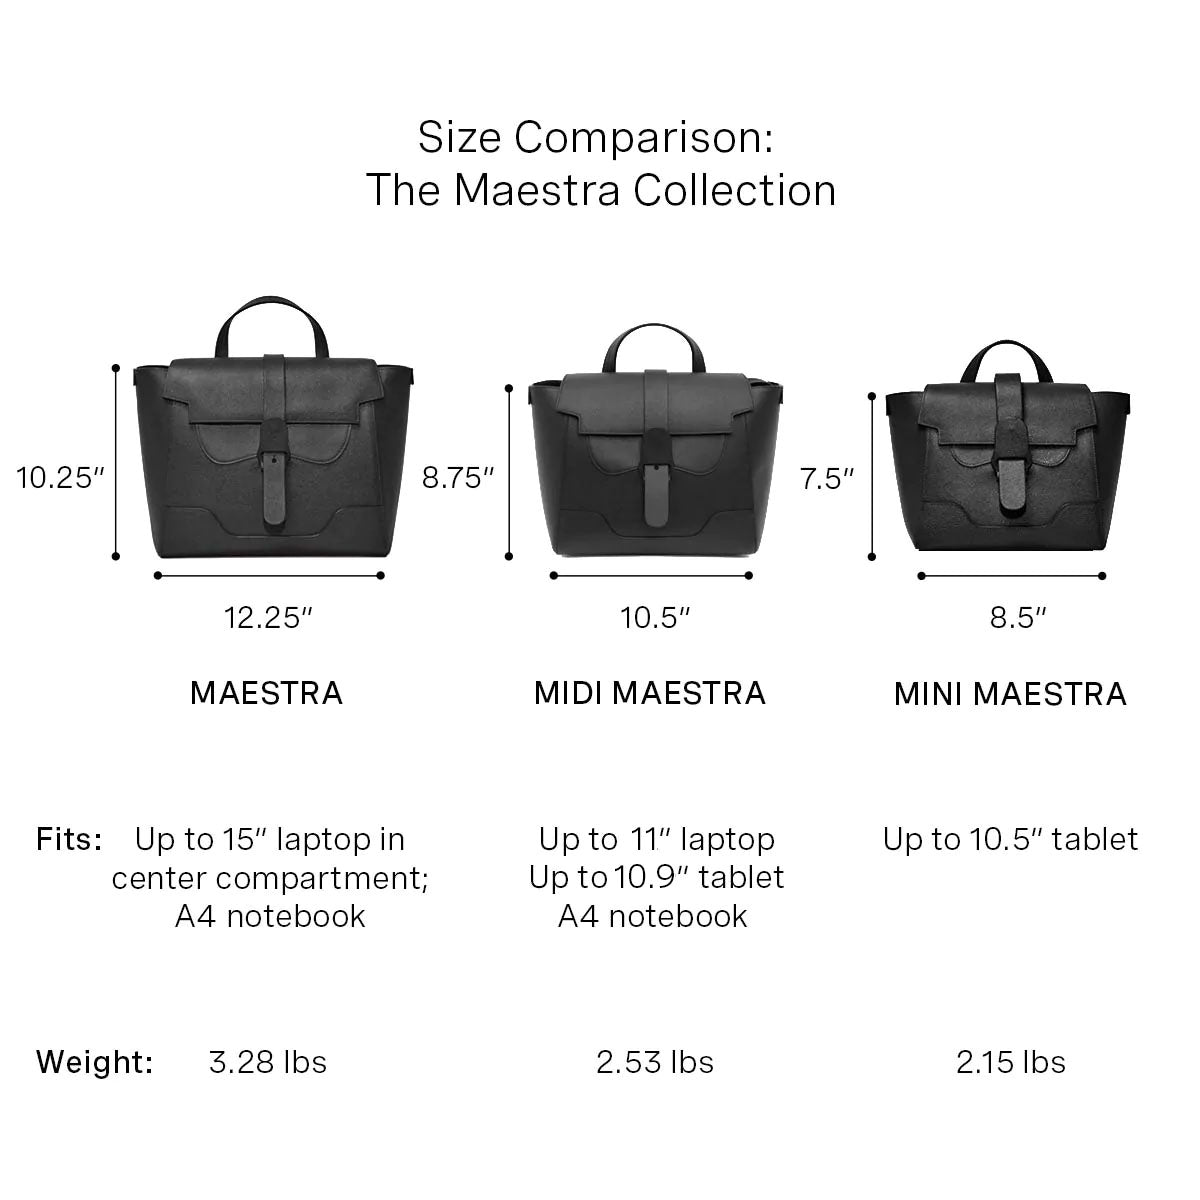 Senreve Maestra Convertible Bag Review: Yes, It's Worth the Price